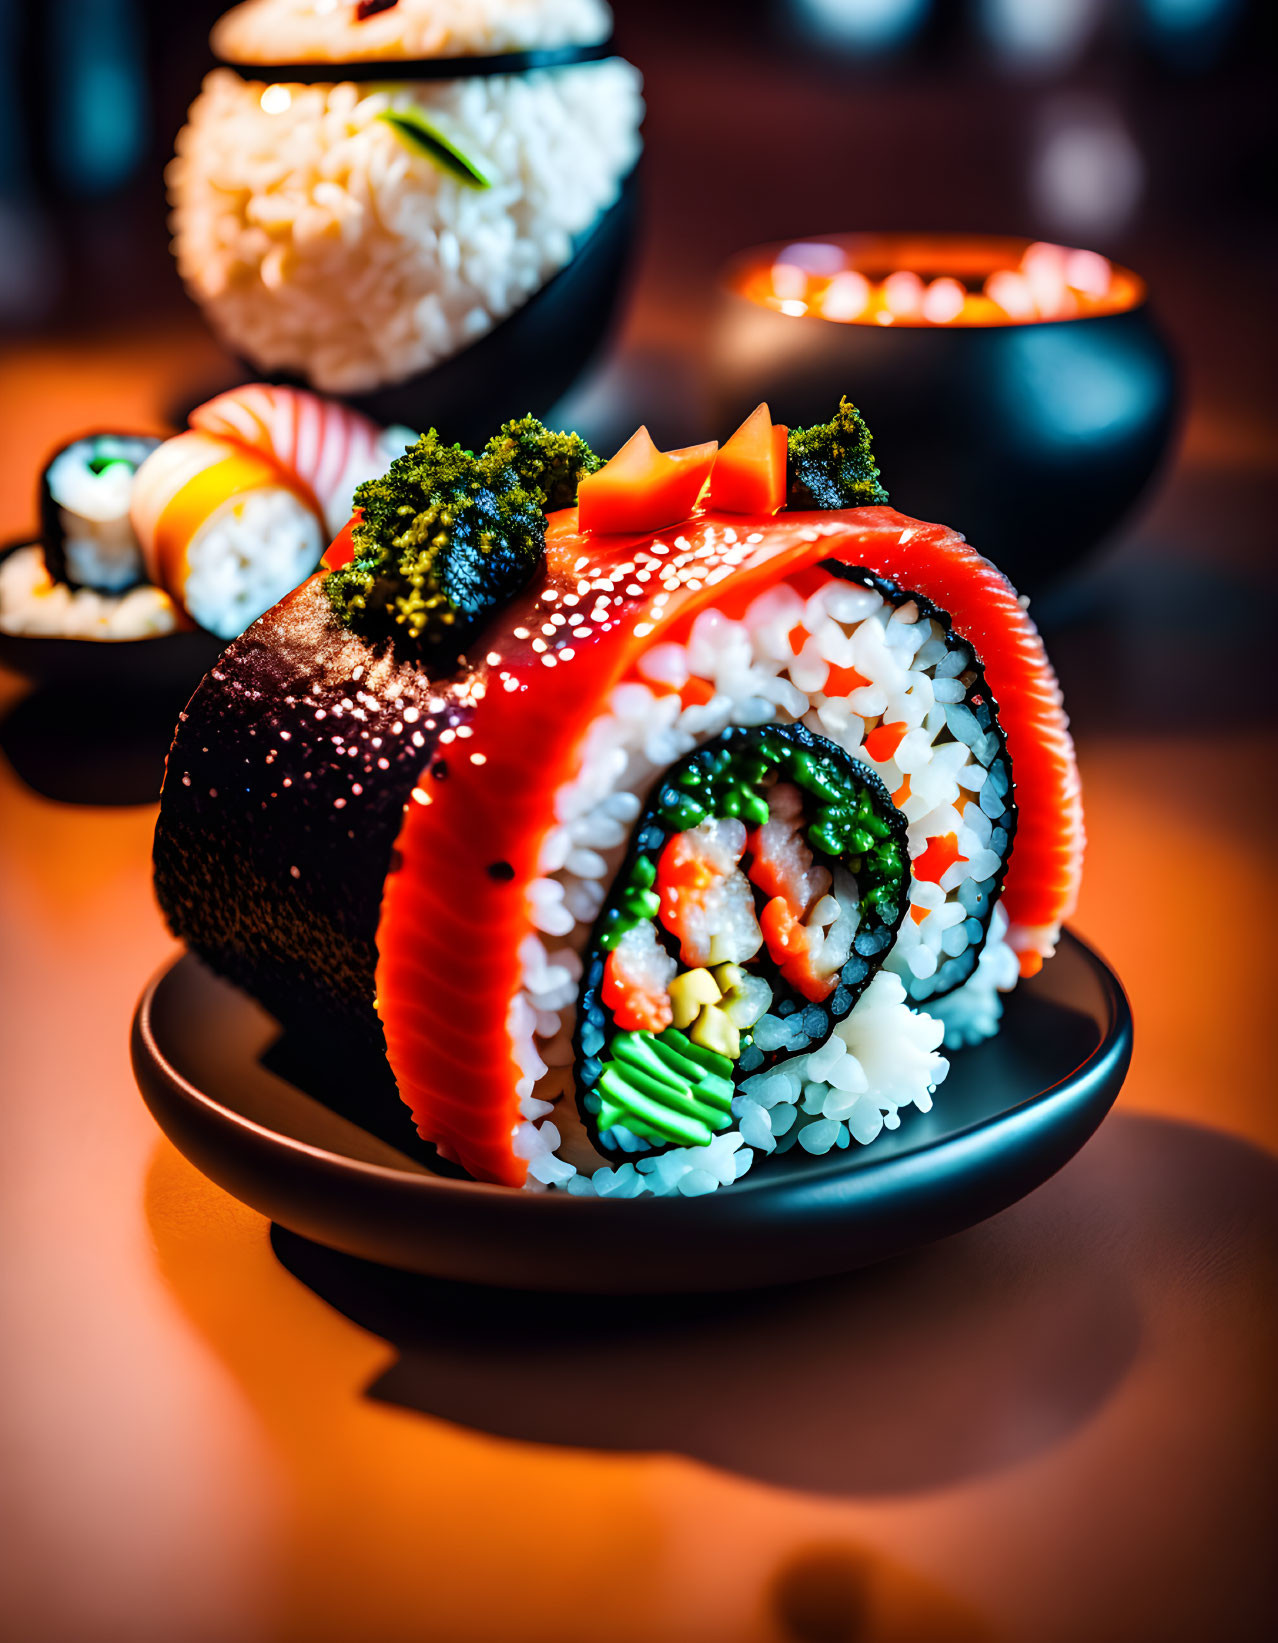 Colorful Sushi Roll with Fish, Vegetables, and Rice